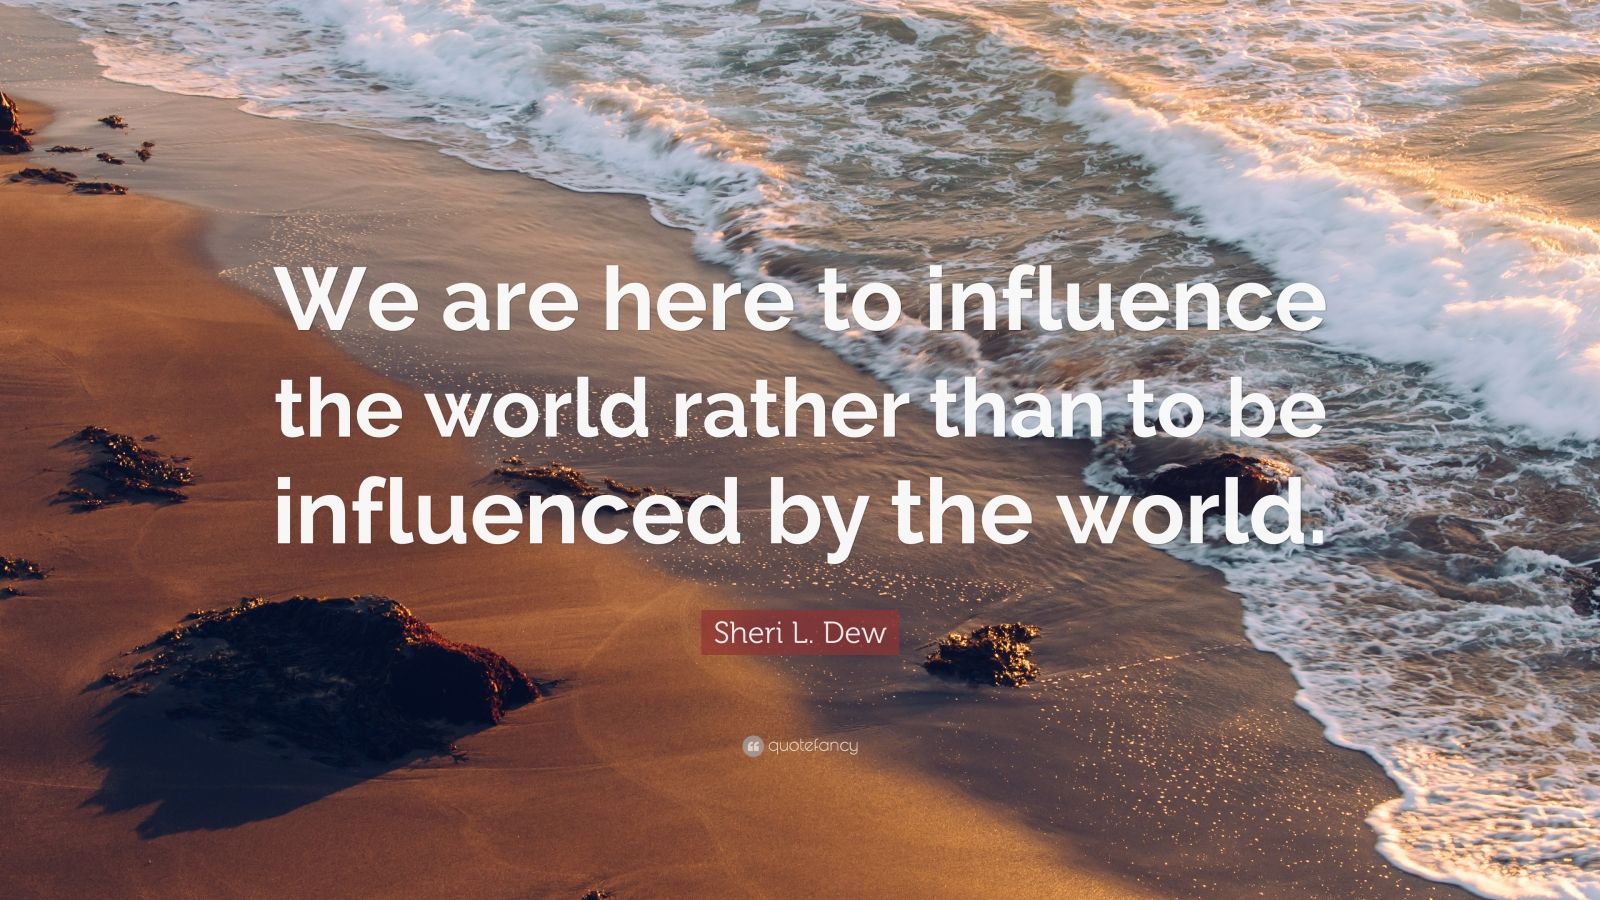 Sheri L. Dew Quote: “We are here to influence the world rather than to